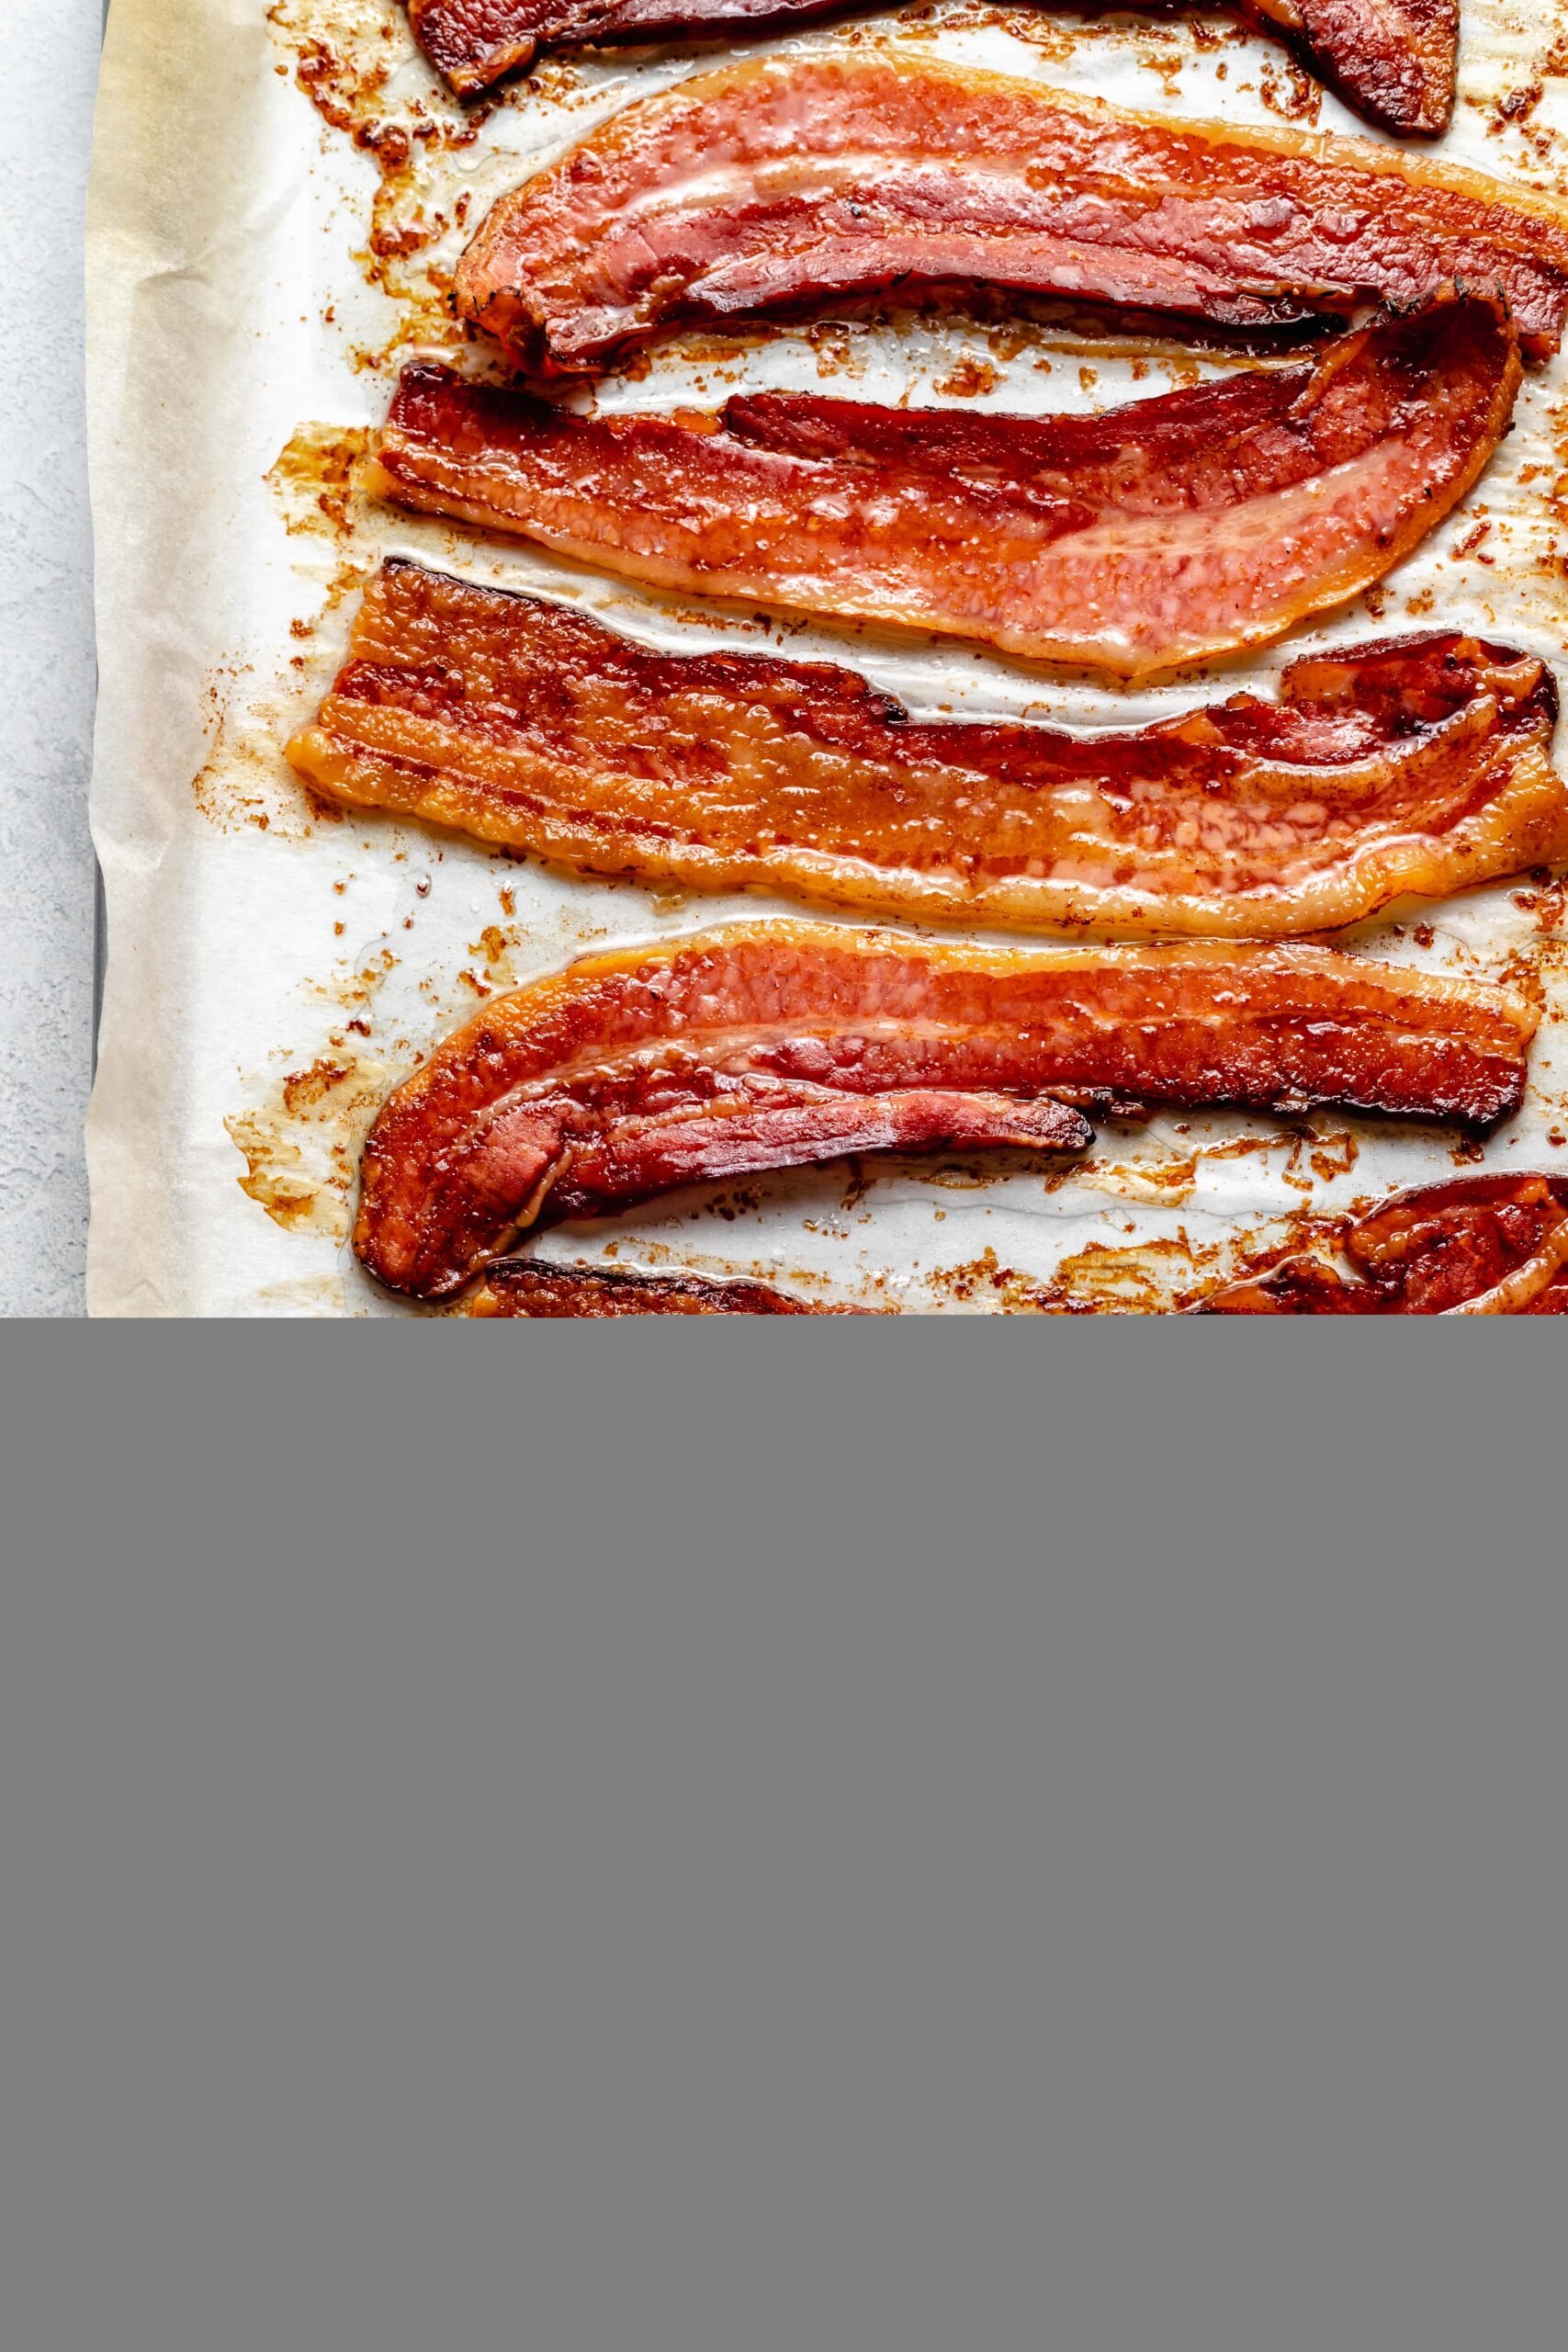 https://allthehealthythings.com/wp-content/uploads/2021/07/How-to-Bake-Bacon-in-the-Oven-4-1-scaled.jpg